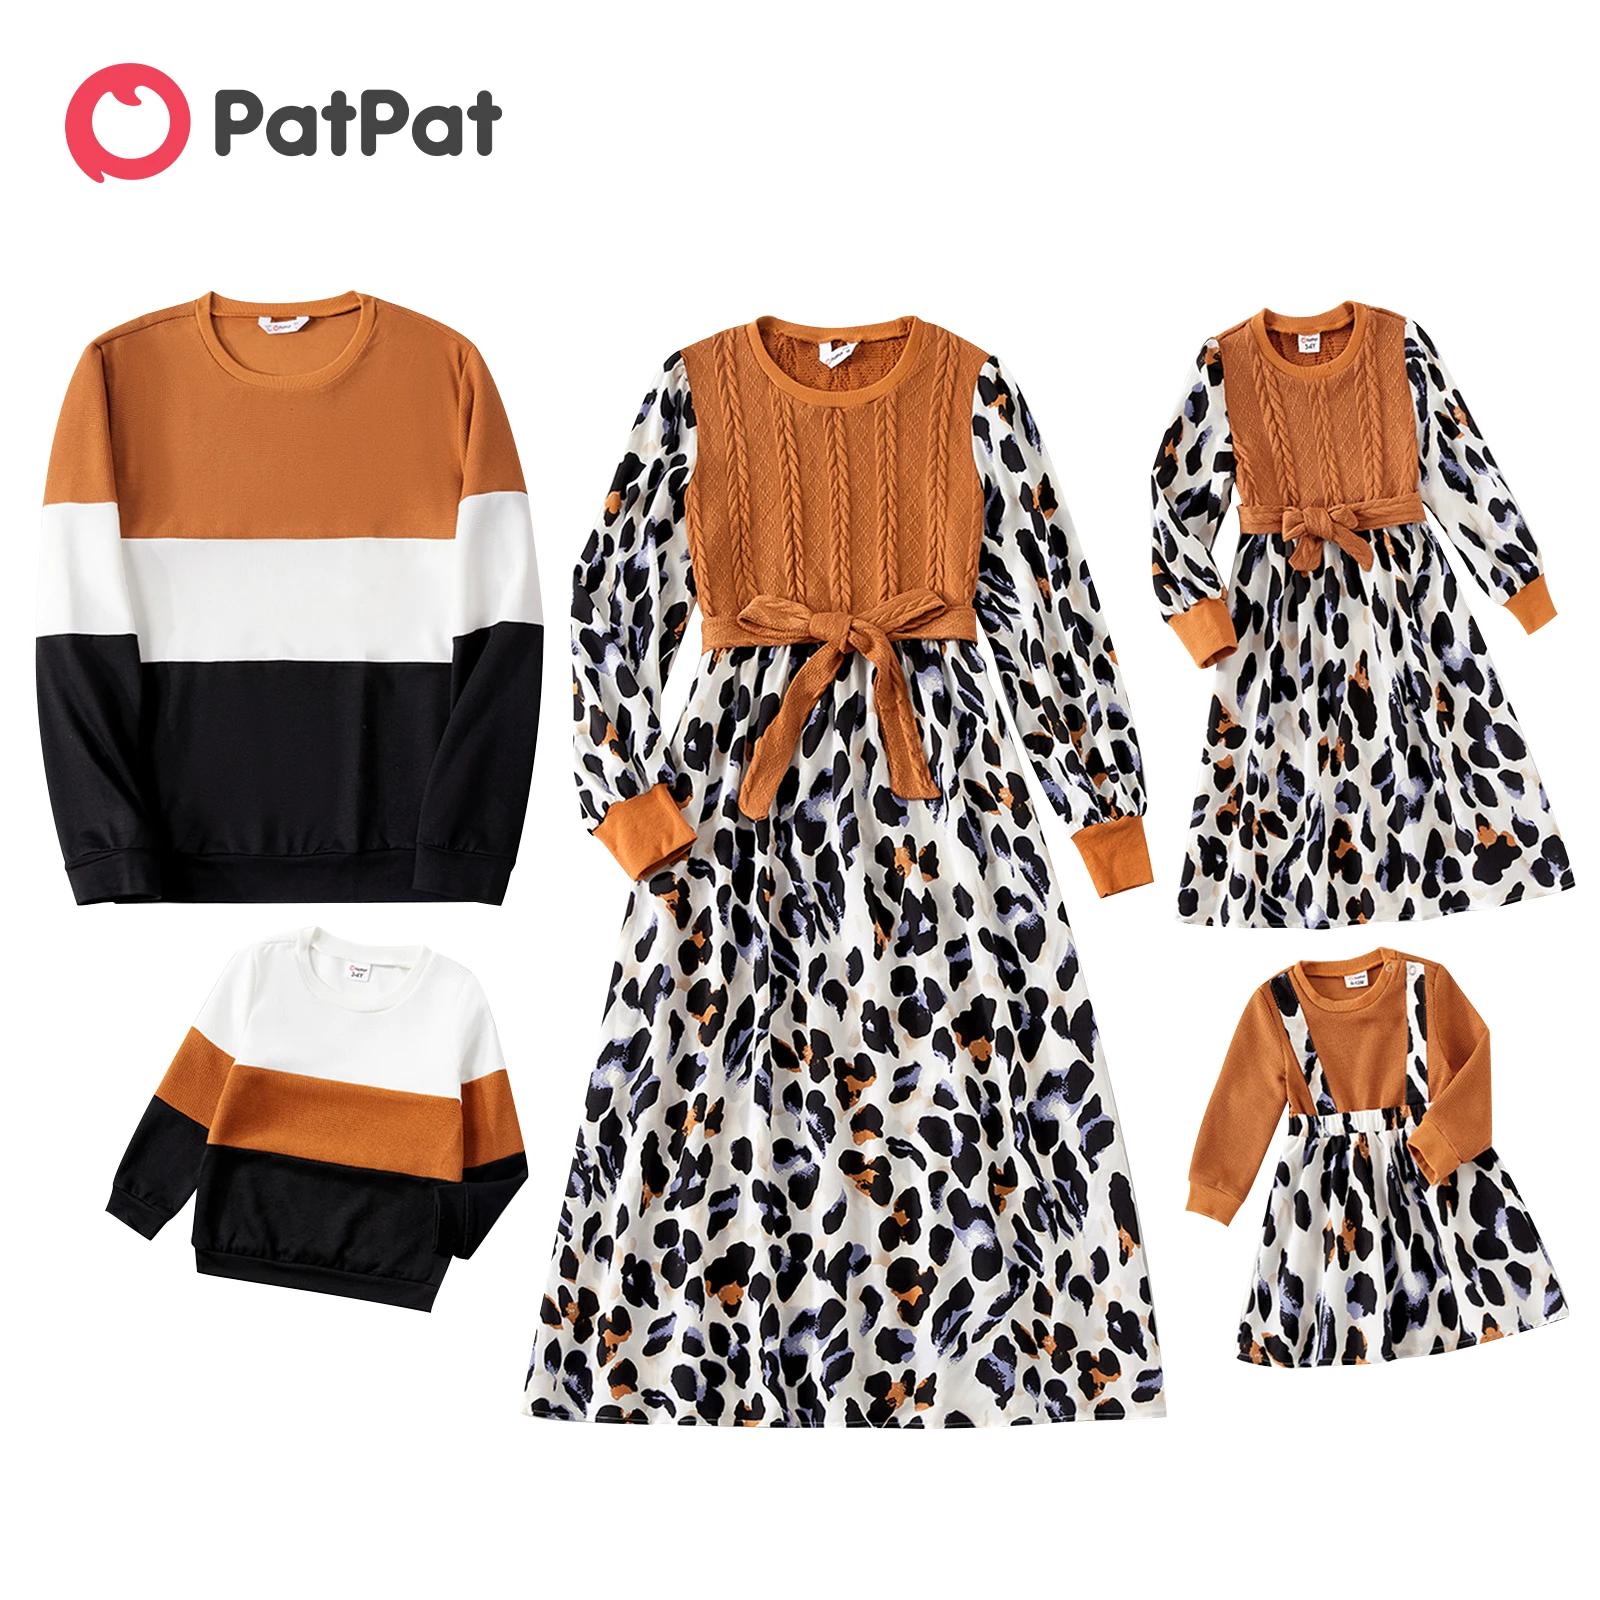 

PatPat Family Matching Outfits Leopard Print Spliced Cable Knit Belted Midi Dresses and Long-sleeve Colorblock Sweatshirts Sets